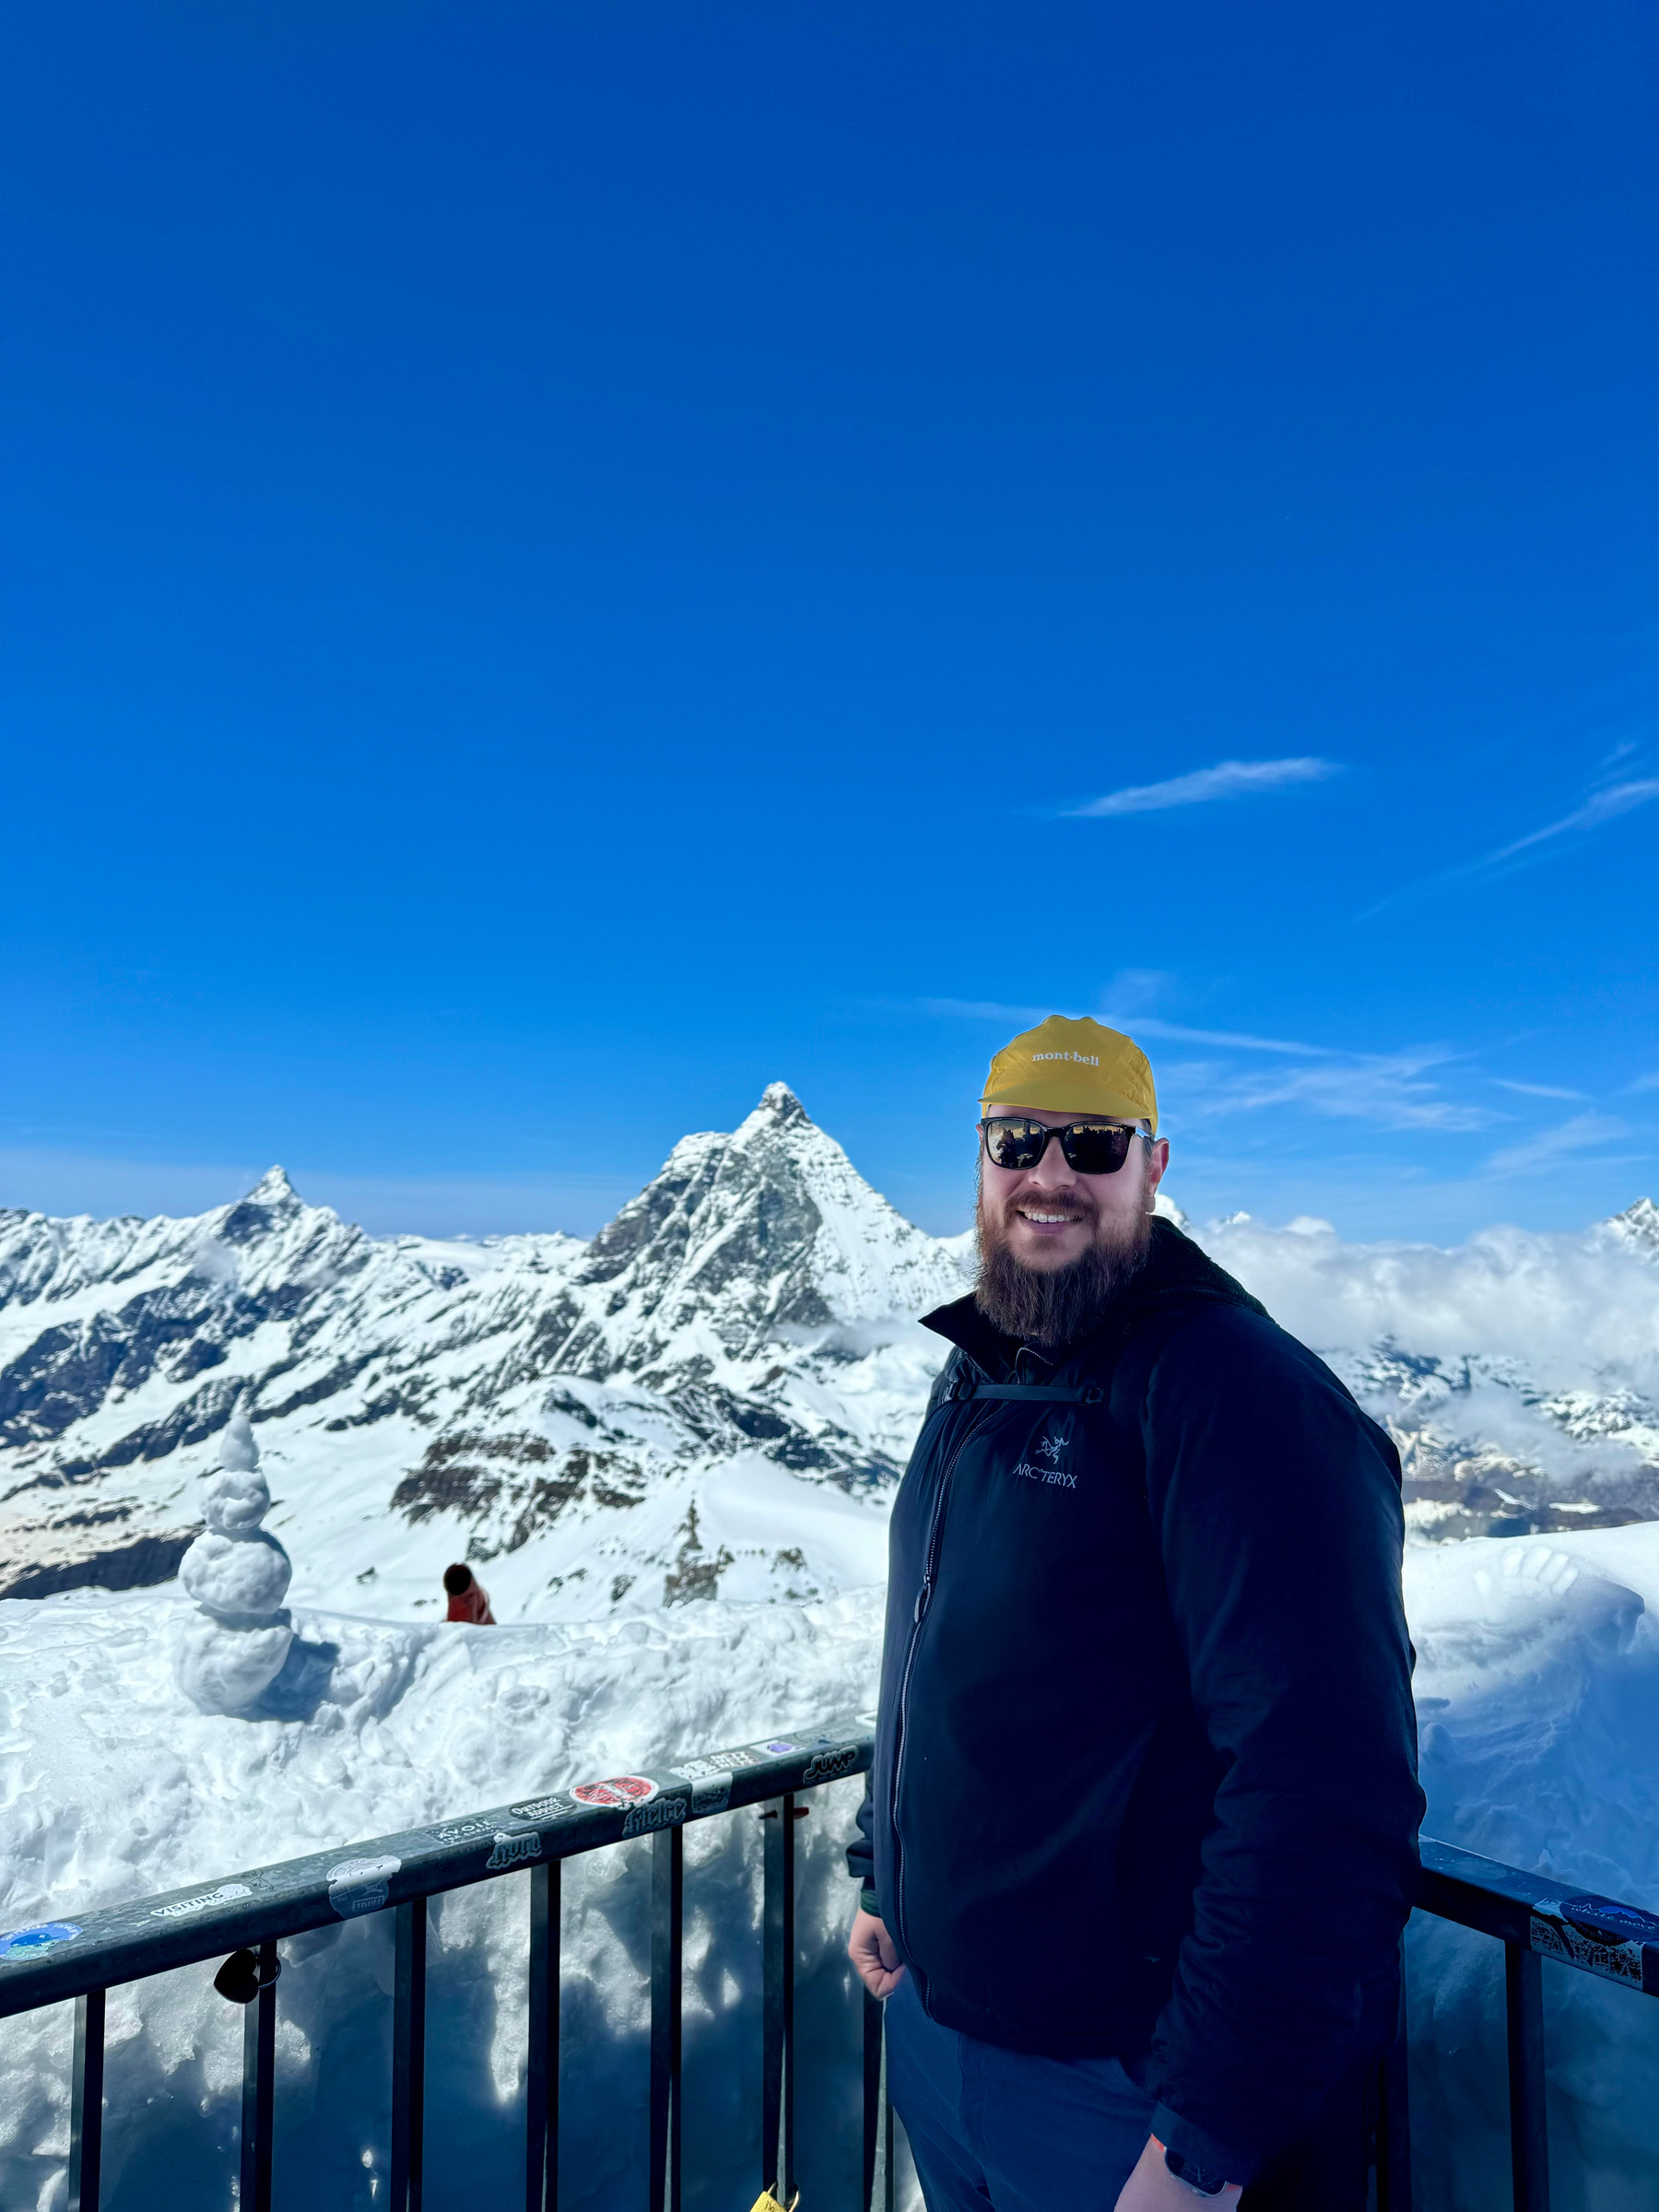 A man with a beard wearing a black jacket and a yellow hat stands smiling in front of a snow-covered mountain range under a clear blue sky.